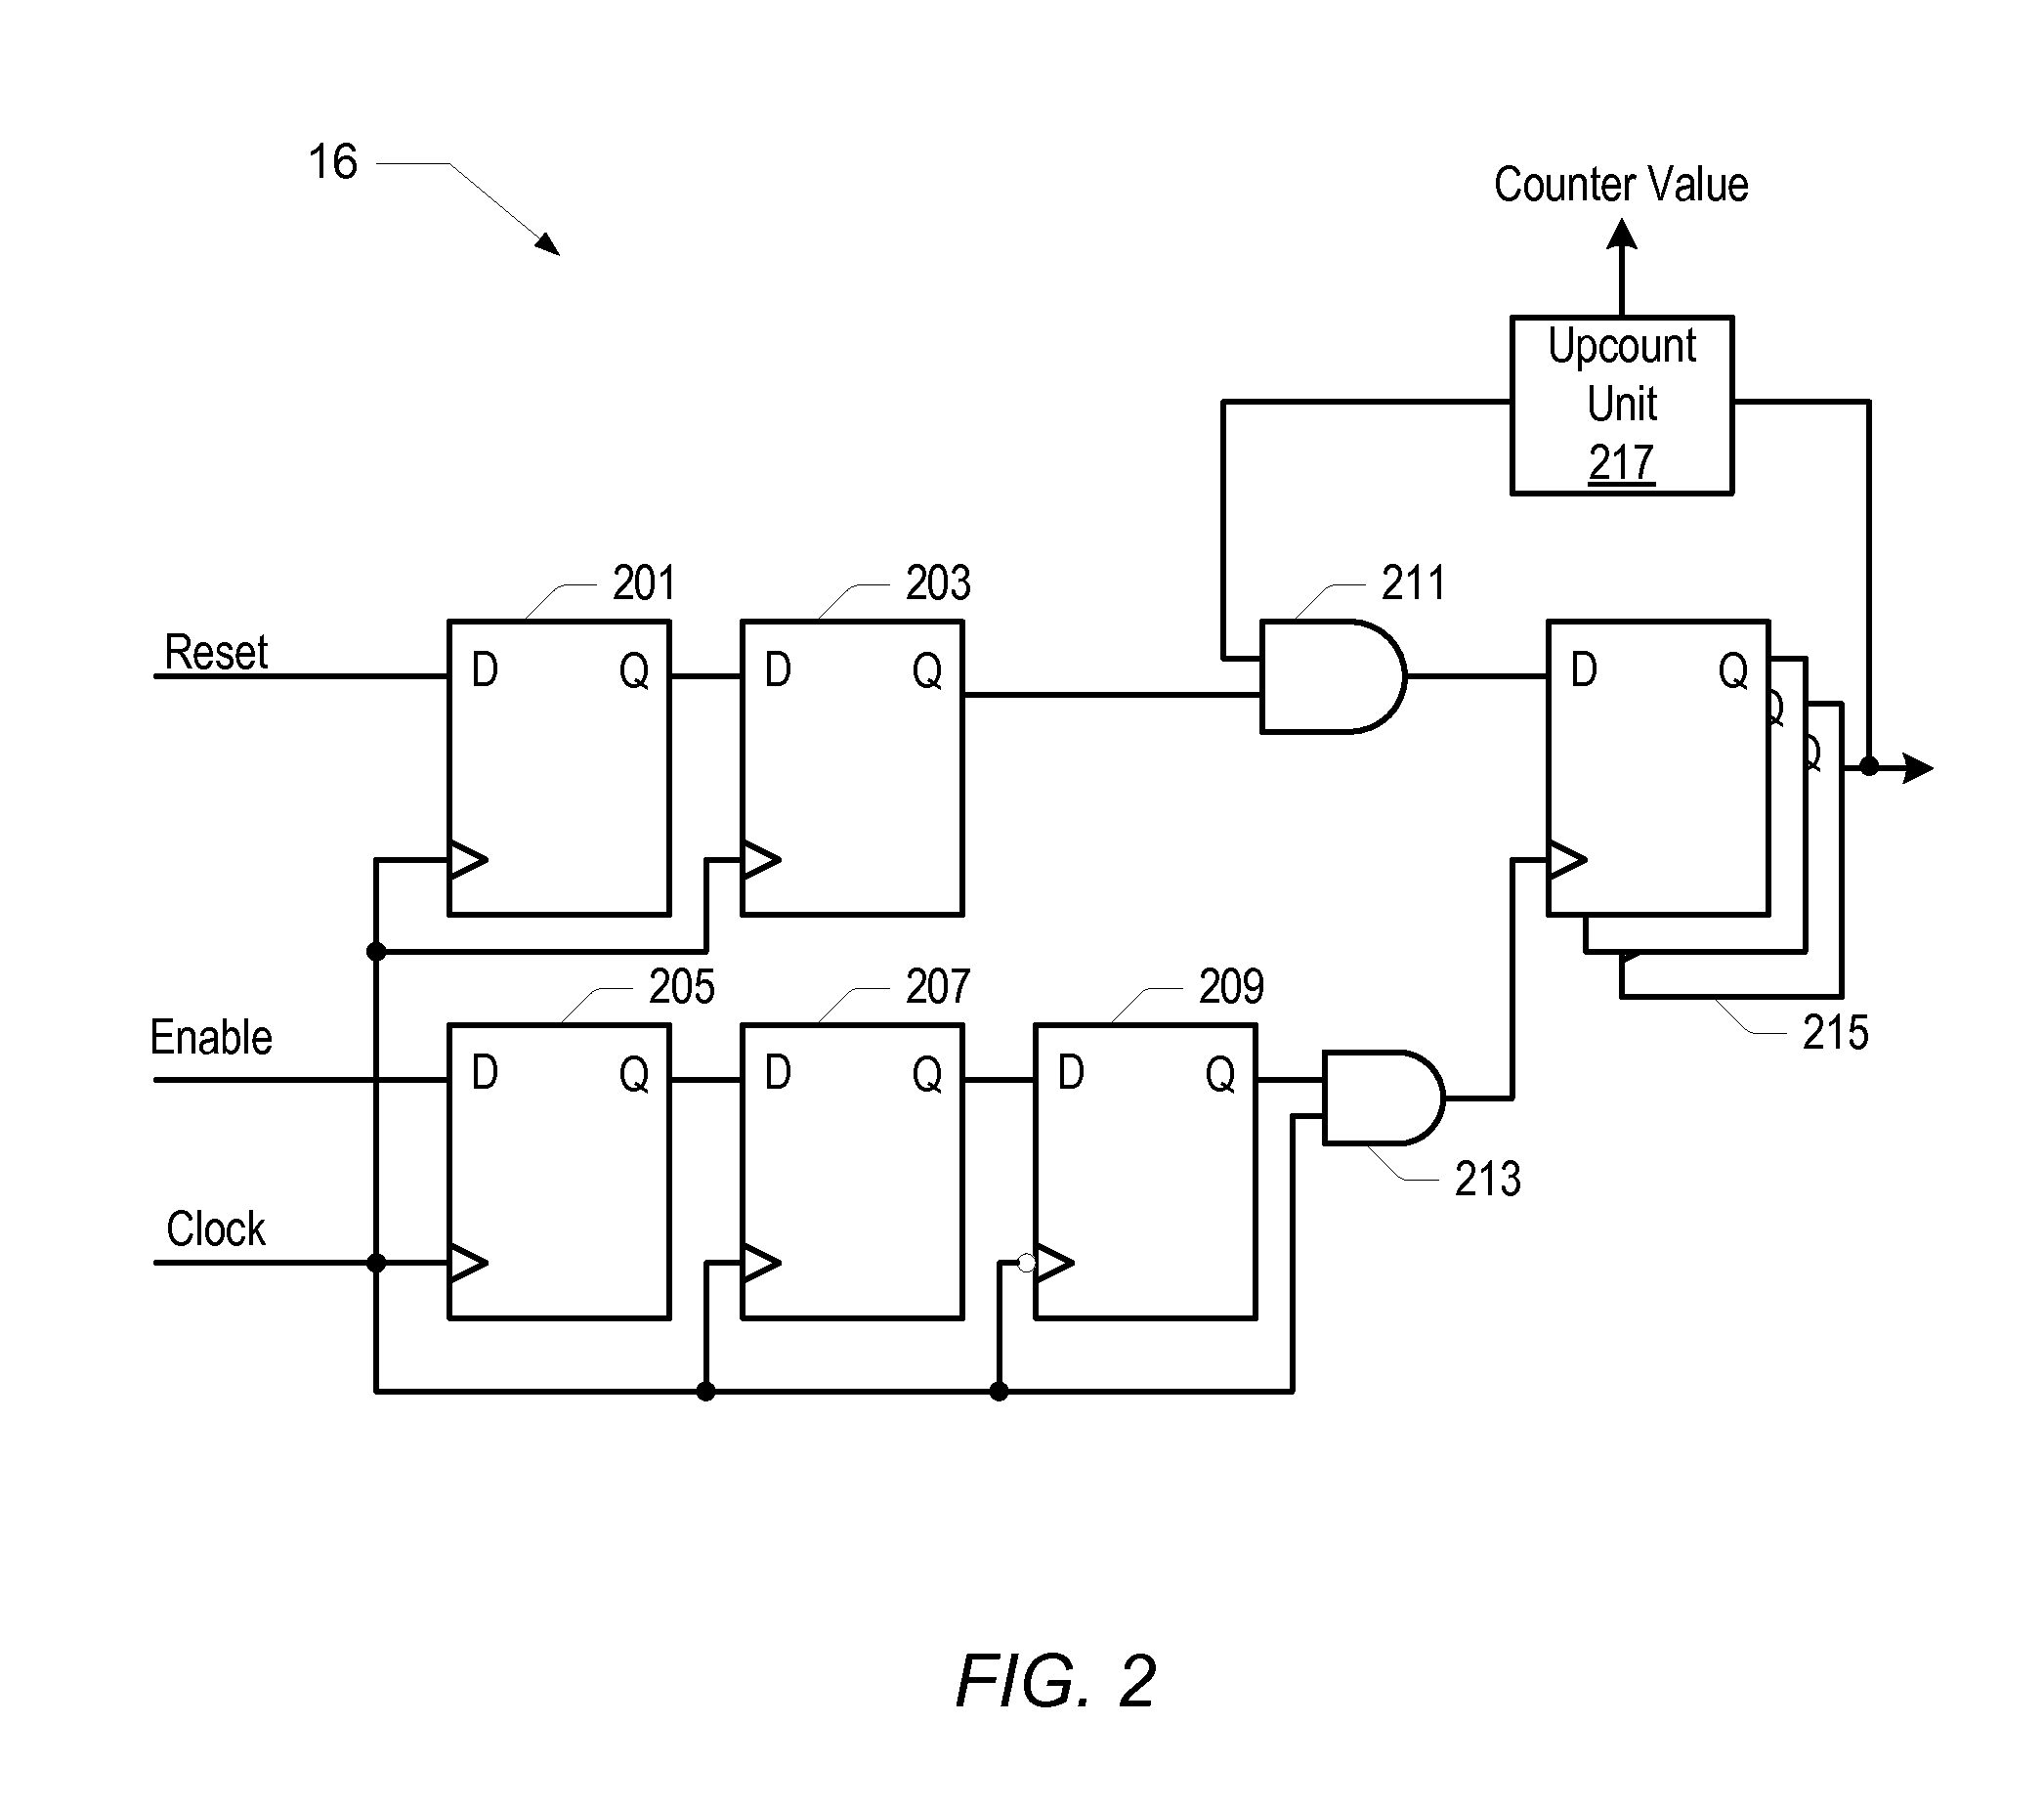 Frequency detection mechanism for a clock generation circuit